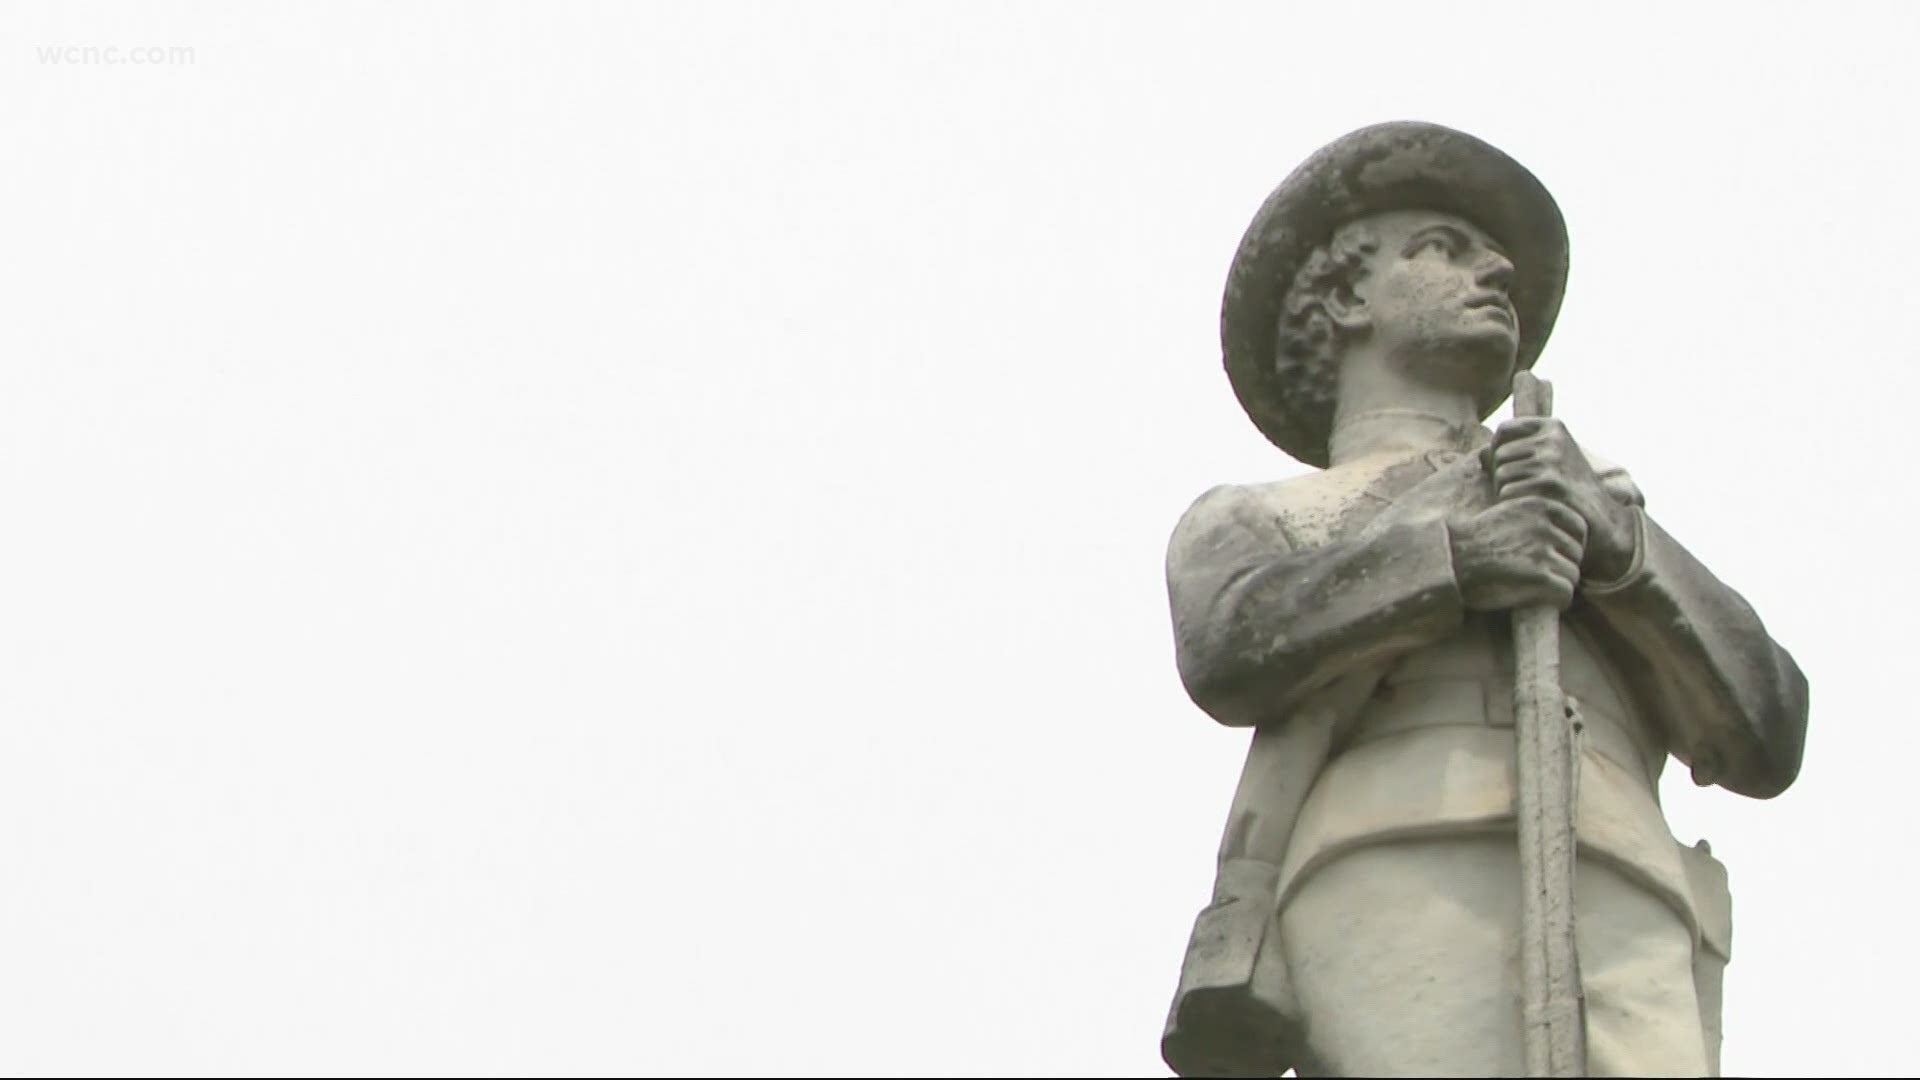 The Council of Understanding voted seven to five in favor of moving the confederate monument outside the Gaston County Courthouse